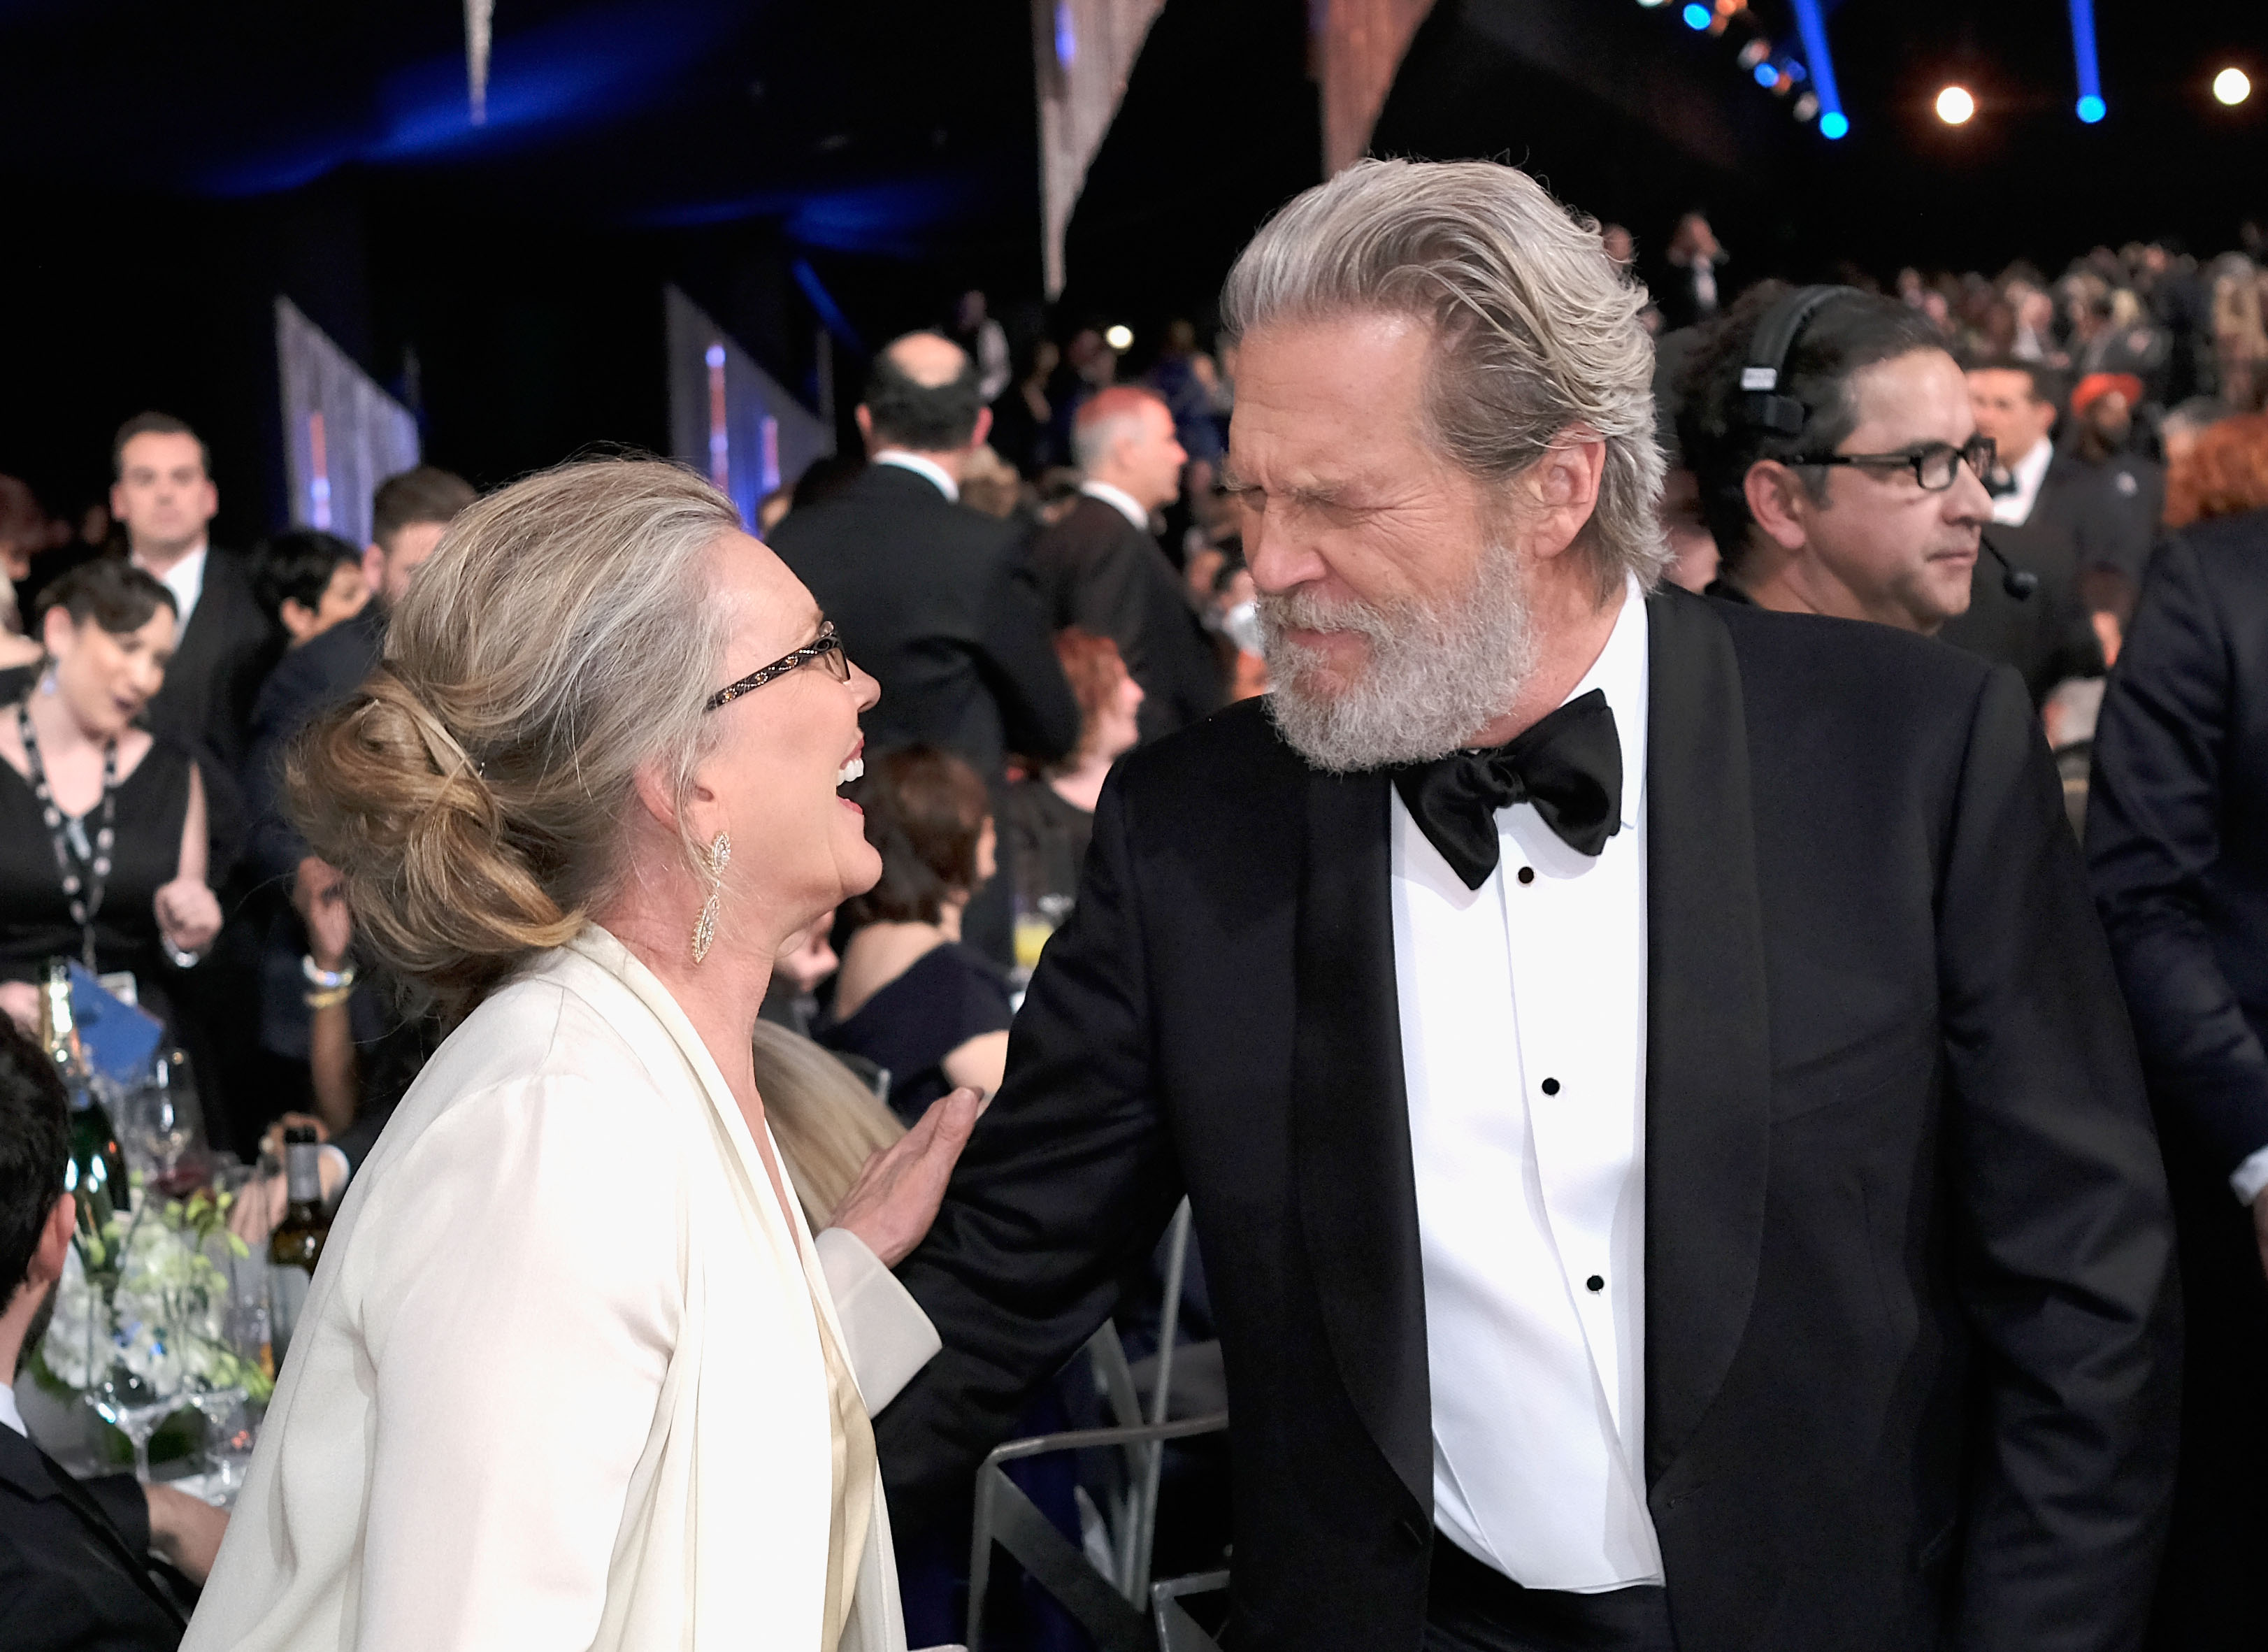 Susan and Jeff Bridges attend The 23rd Annual Screen Actors Guild Awards at The Shrine Auditorium in Los Angeles, California on January 29, 2017. | Source: Getty Images